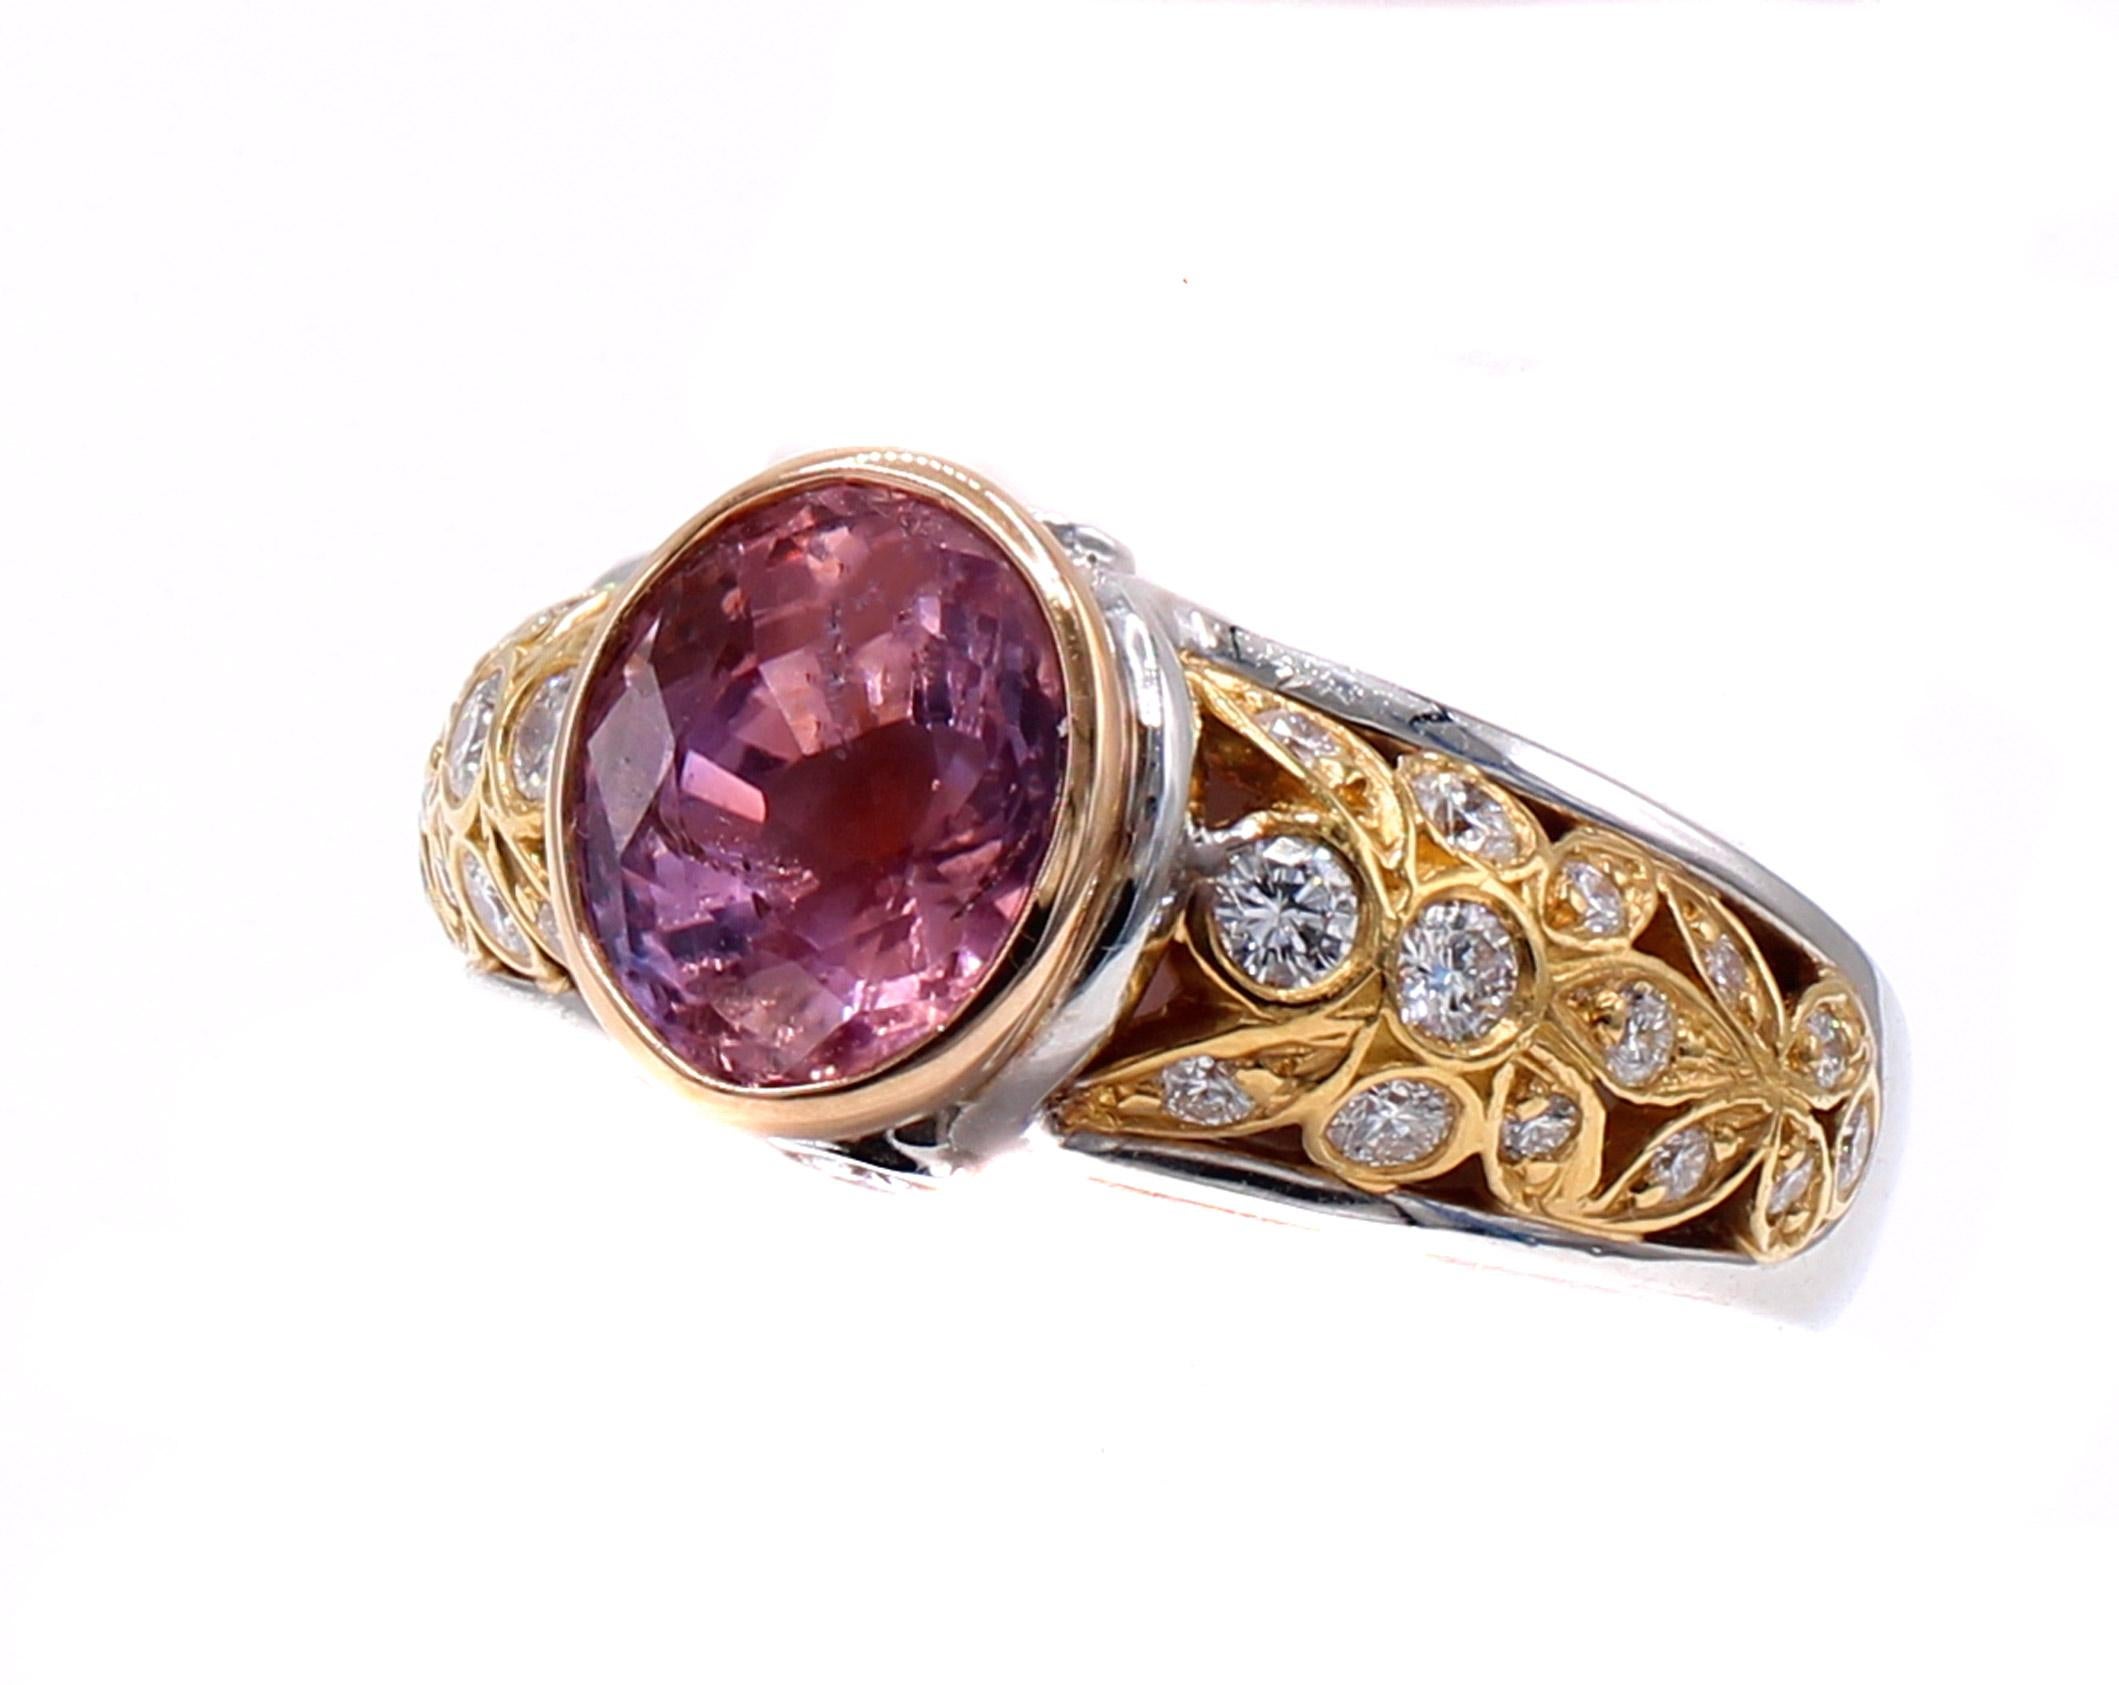 This unique, beautifully designed and masterfully handcrafted ring features an amazing and rare 3.39 carat natural Padparadscha sapphire. Showing off a gorgeous orangy pink color and set in a 22 karat rose gold bezel this beautiful gem stone is